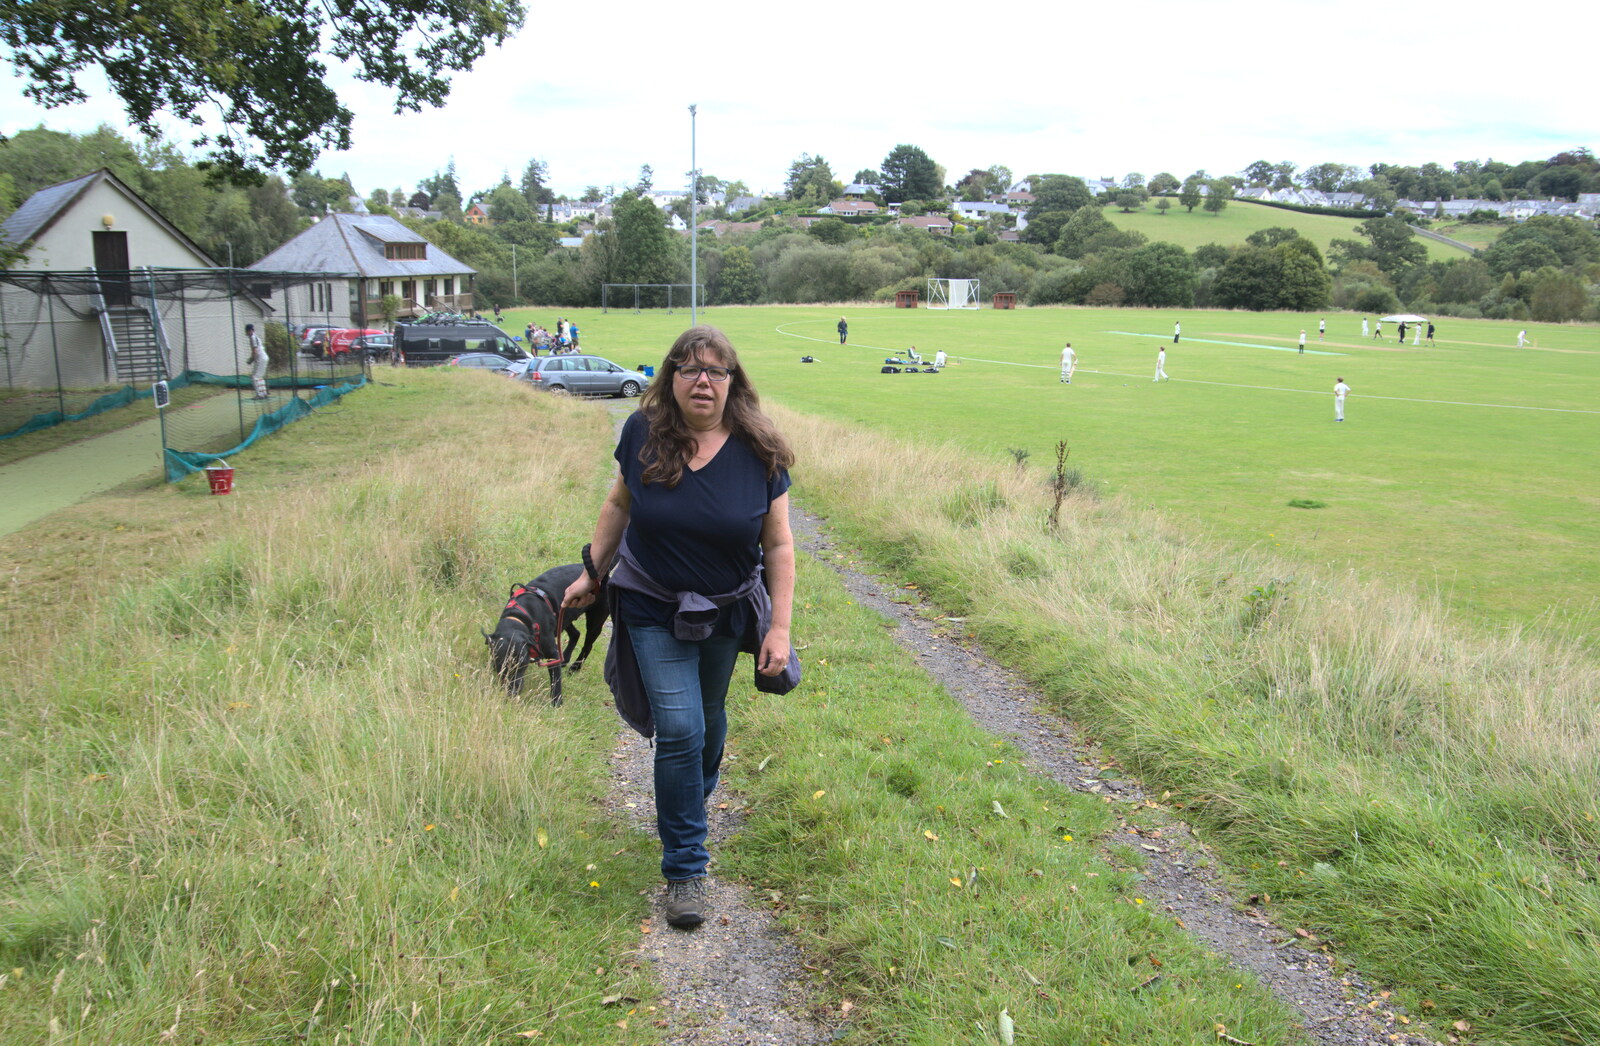 Sis strides around from A Game of Cricket, and a Walk Around Chagford, Devon - 23rd August 2020